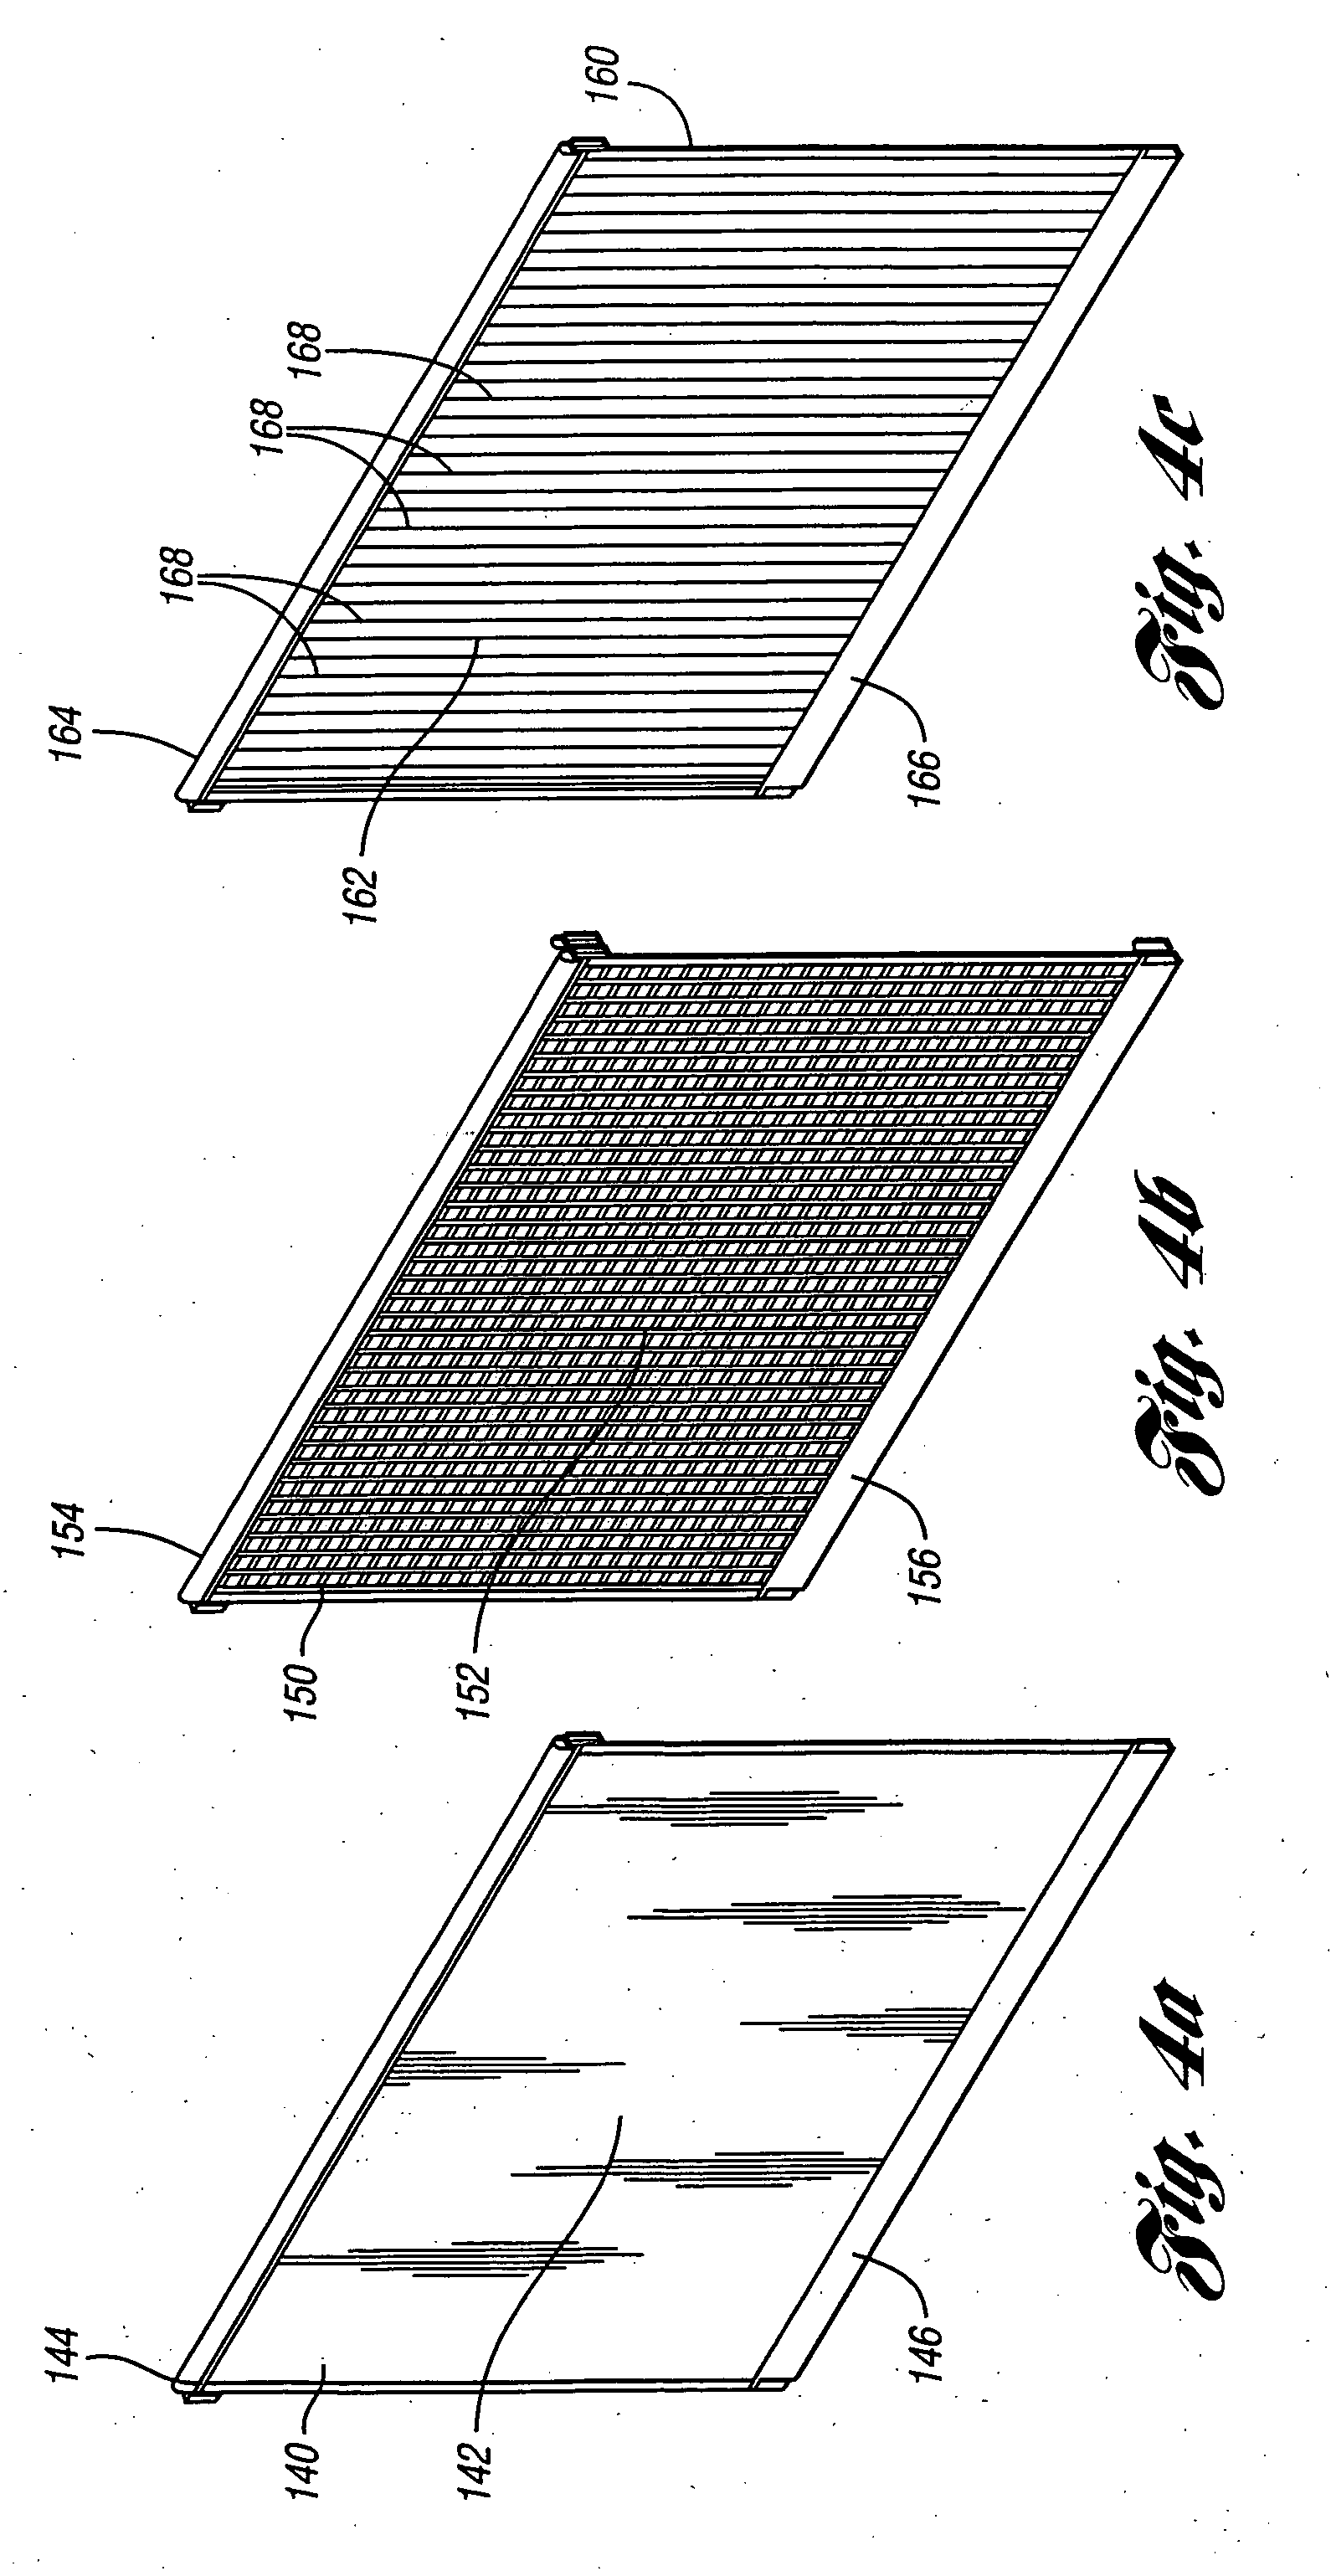 Family of stationary film generators and film support structures for vertical staged polymerization reactors